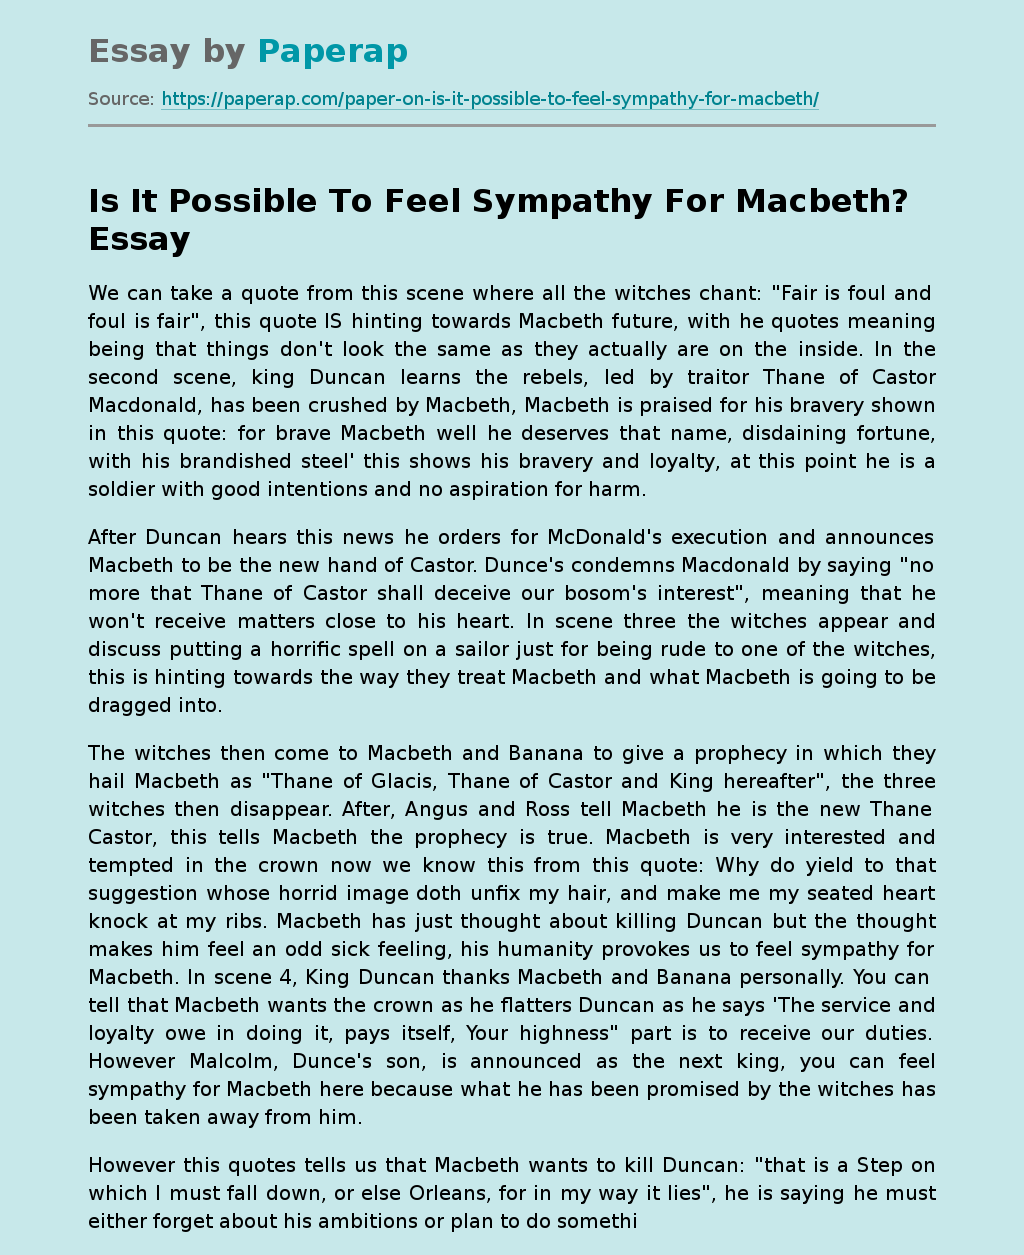 Is It Possible To Feel Sympathy For Macbeth?